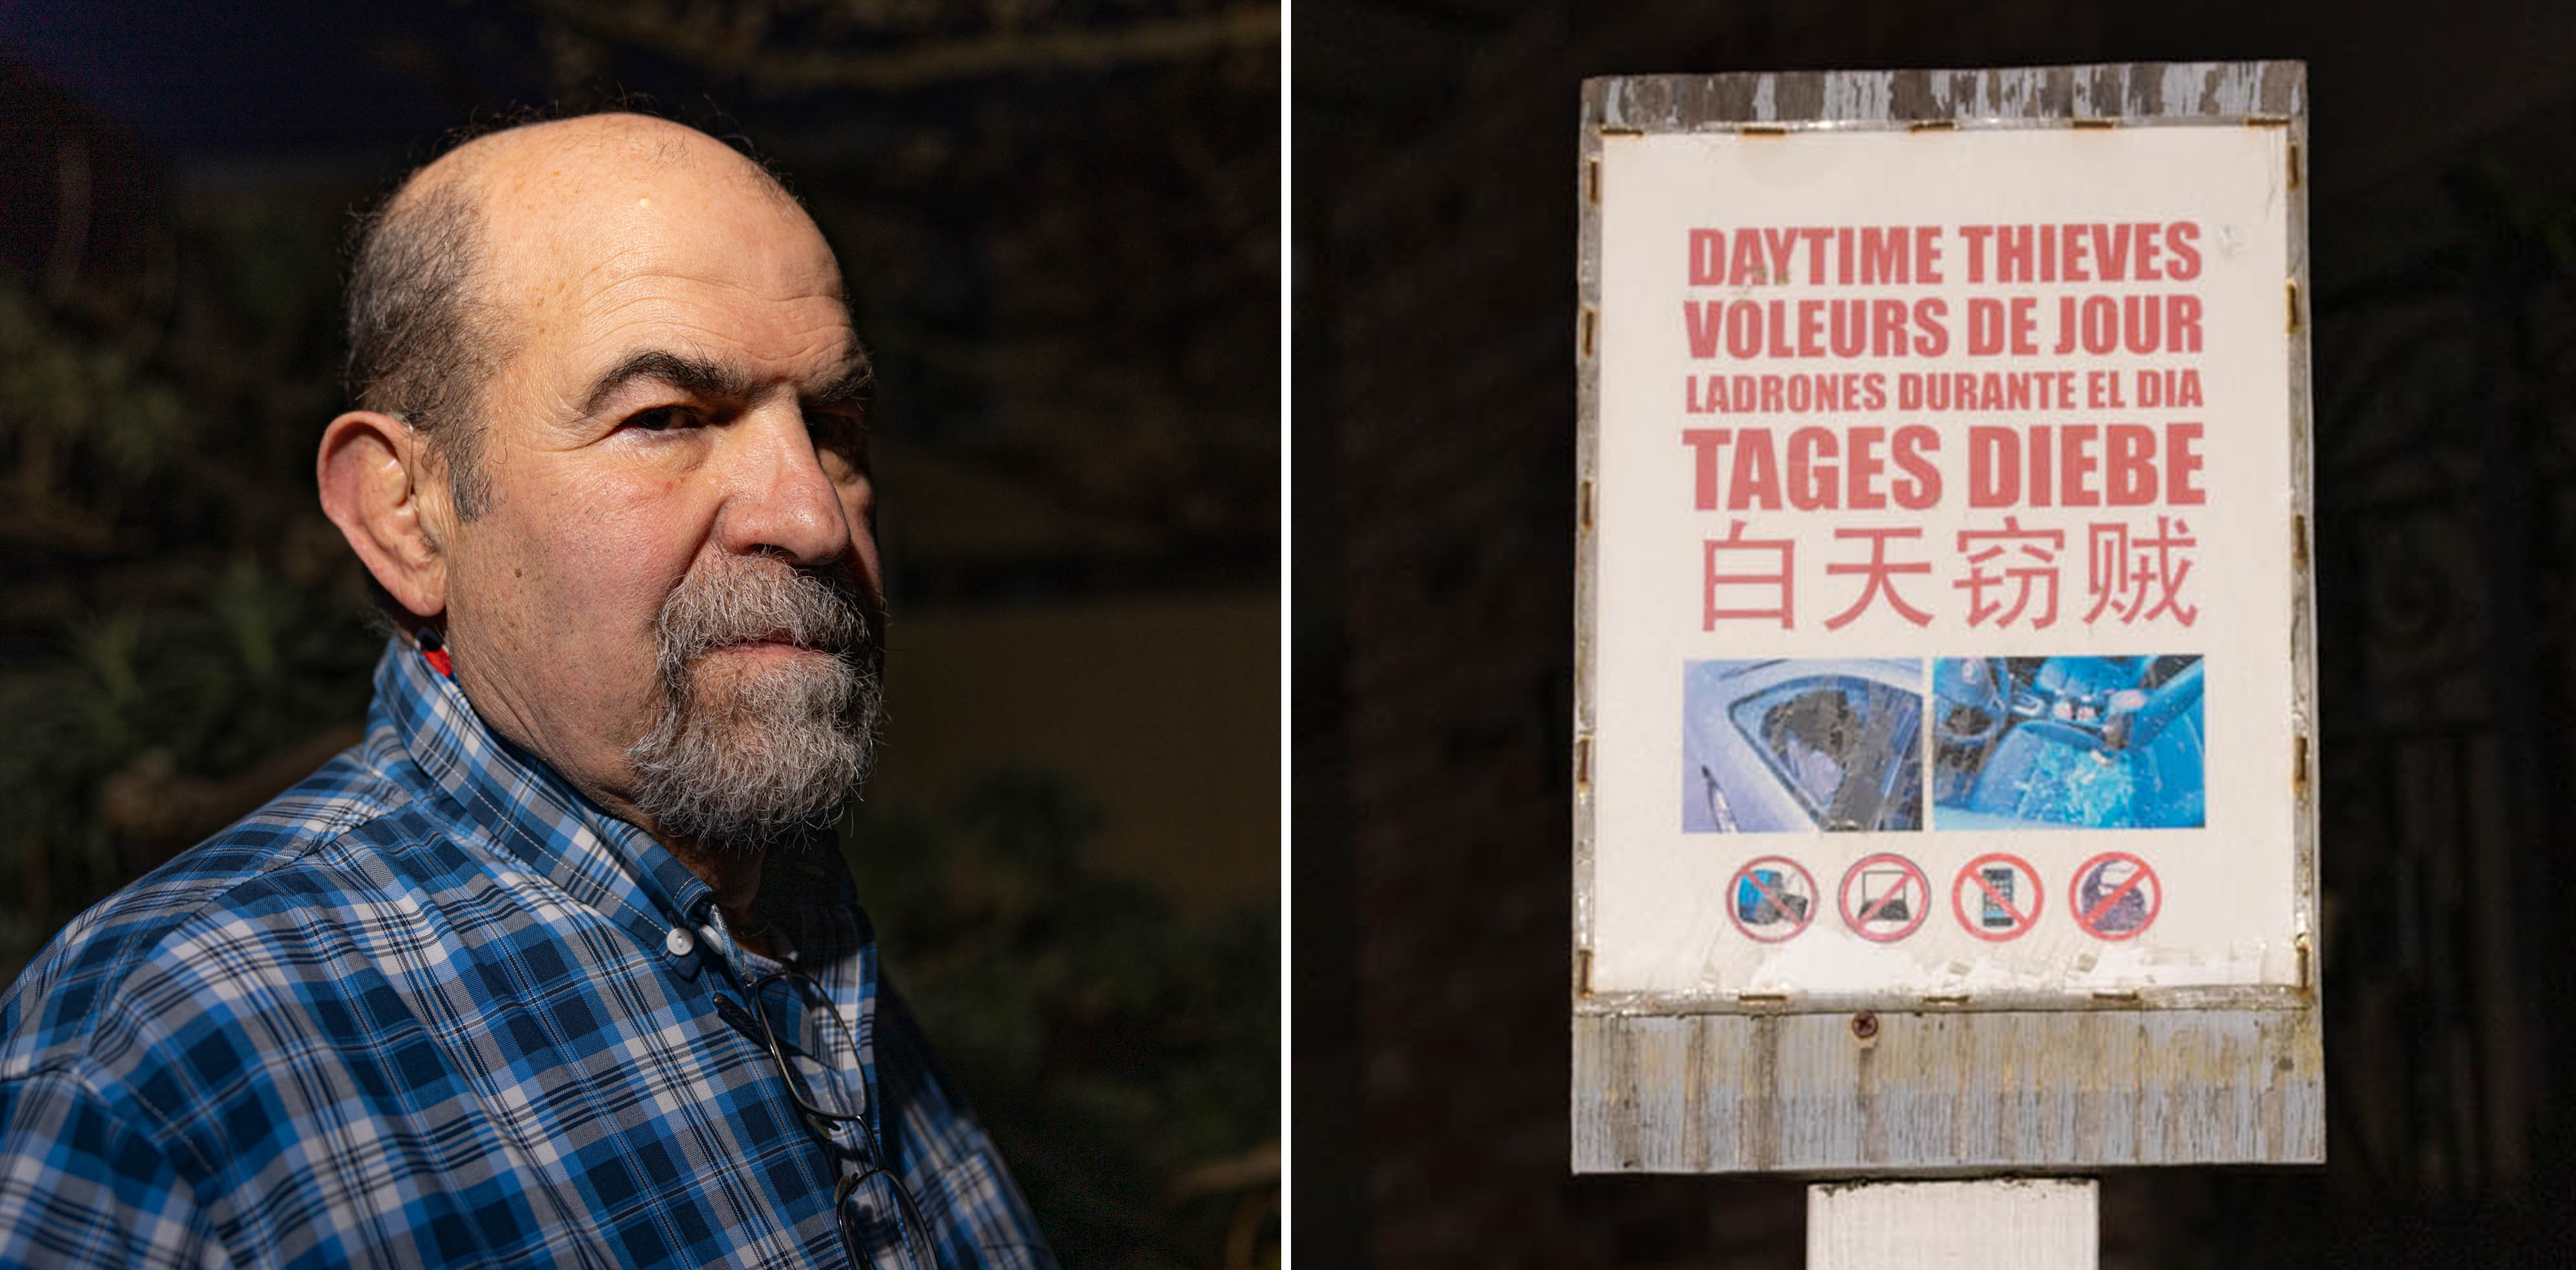 Two photos side by side - one photo is a tight portrait of a man with a goatee looking at the camera and the other photos reads &quot;Daytime Thieves&quot; in english and 5 other languages with pocues of smashes windows.